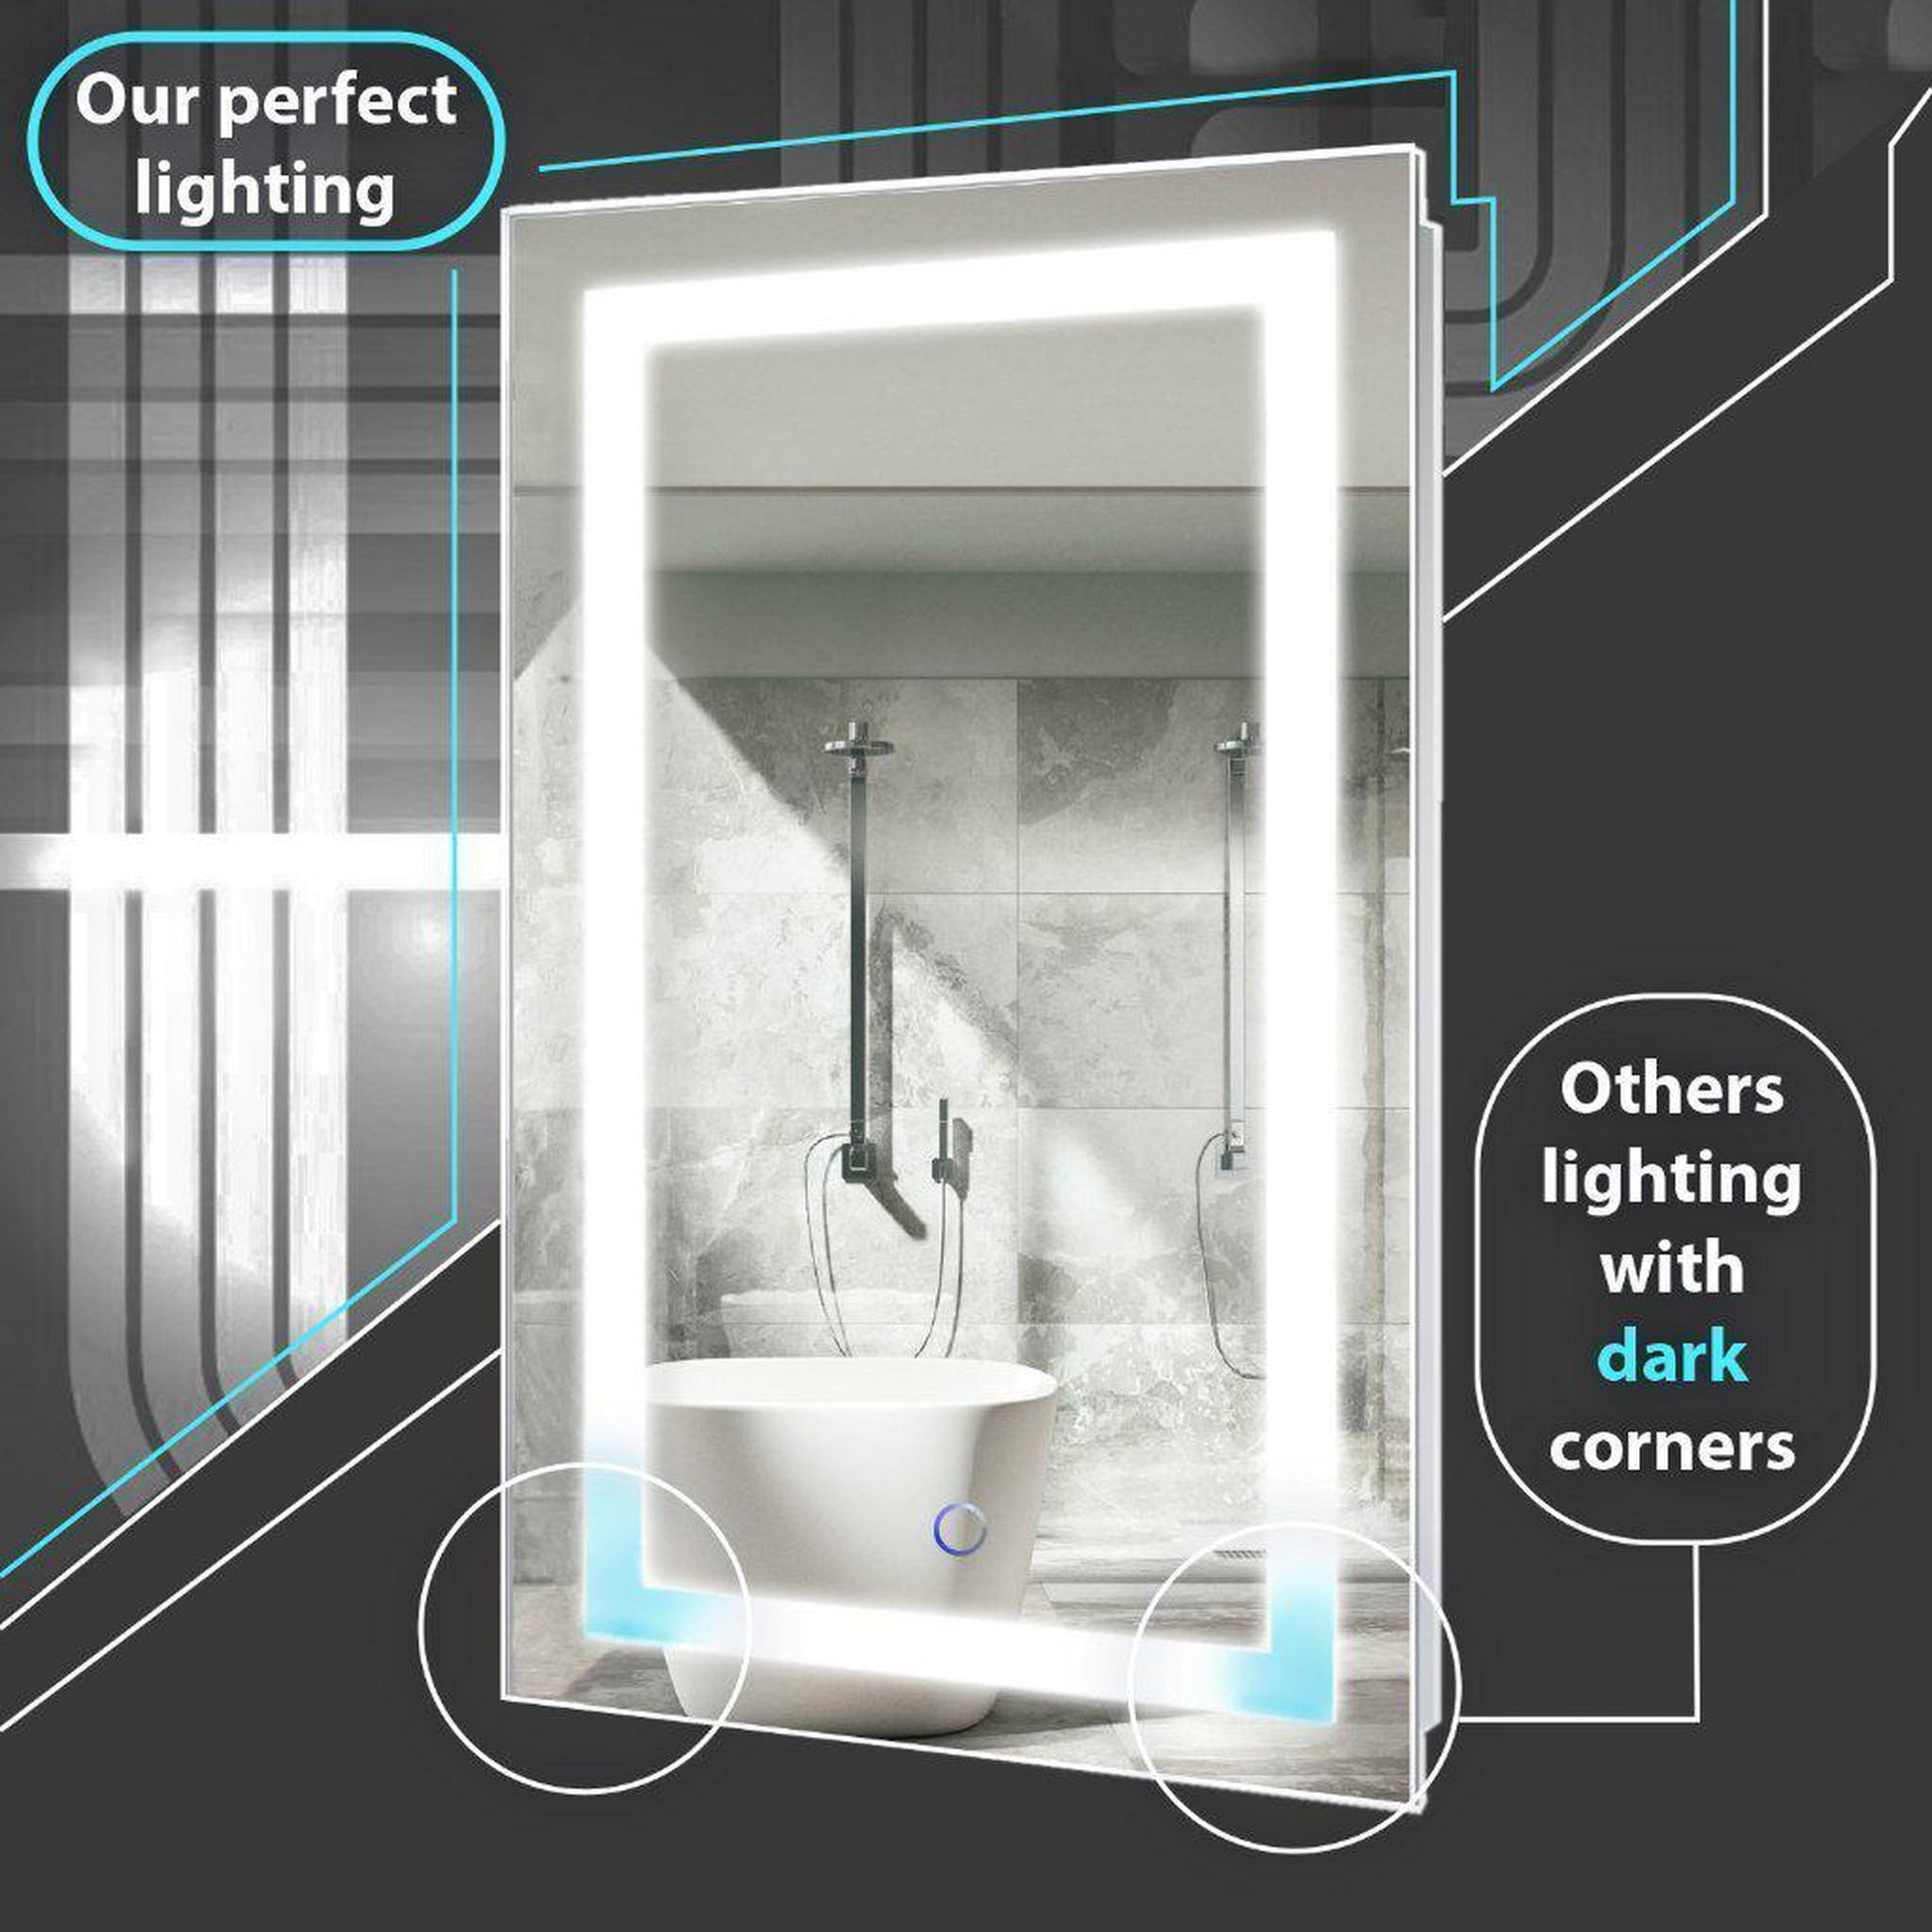 Krugg Reflections Tudor 60" x 30" 5000K Octagon Wall-Mounted Illuminated Silver Backed LED Mirror With Built-in Defogger and Touch Sensor On/Off Built-in Dimmer